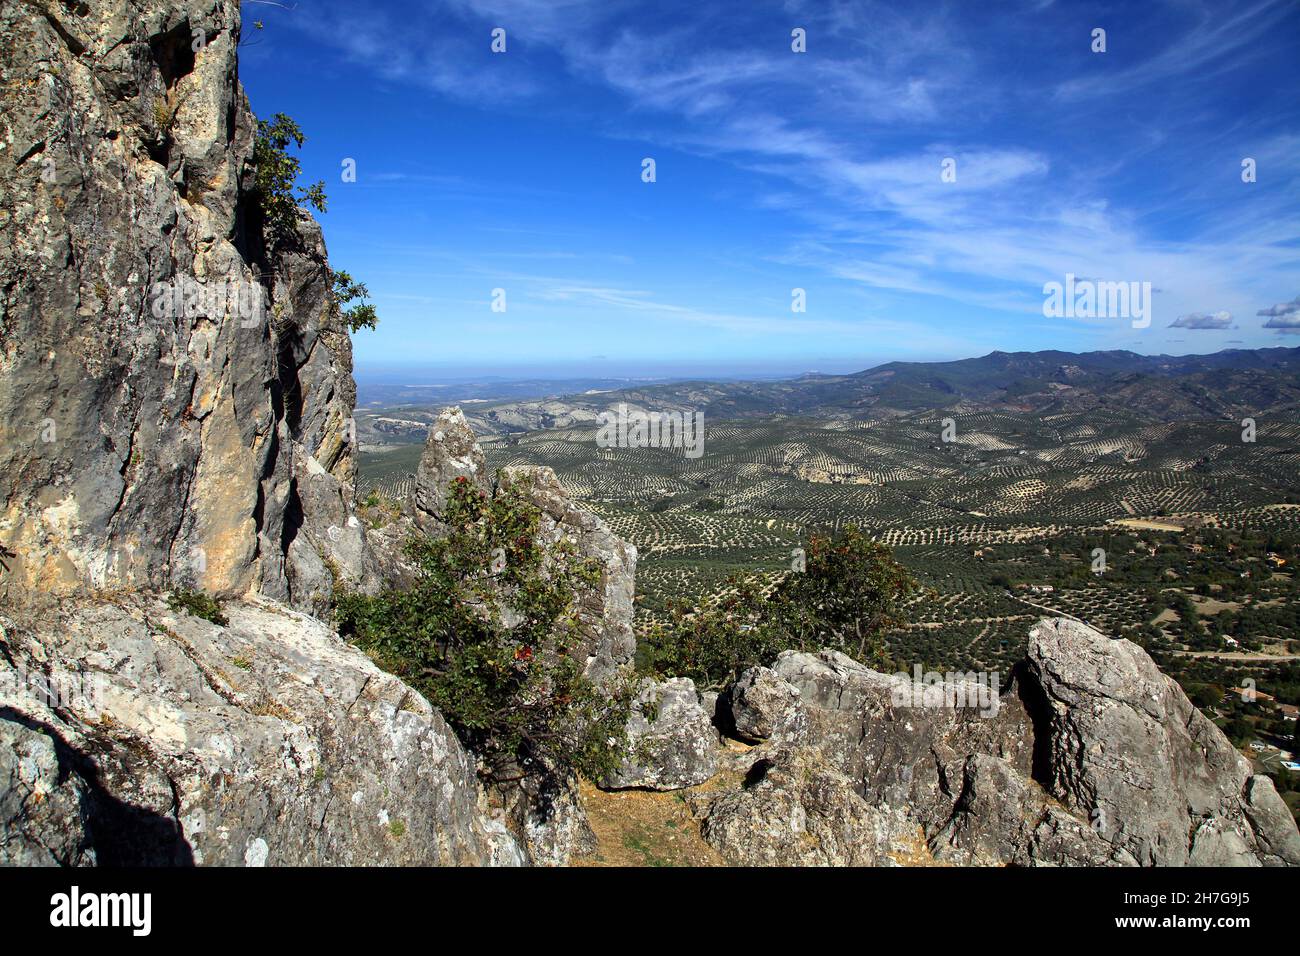 Cazorla is a municipality of Spain located in the province of Jaén, Andalusia.Natural Park of Sierras de Cazorla, Segura y Las Villas Natural Stock Photo